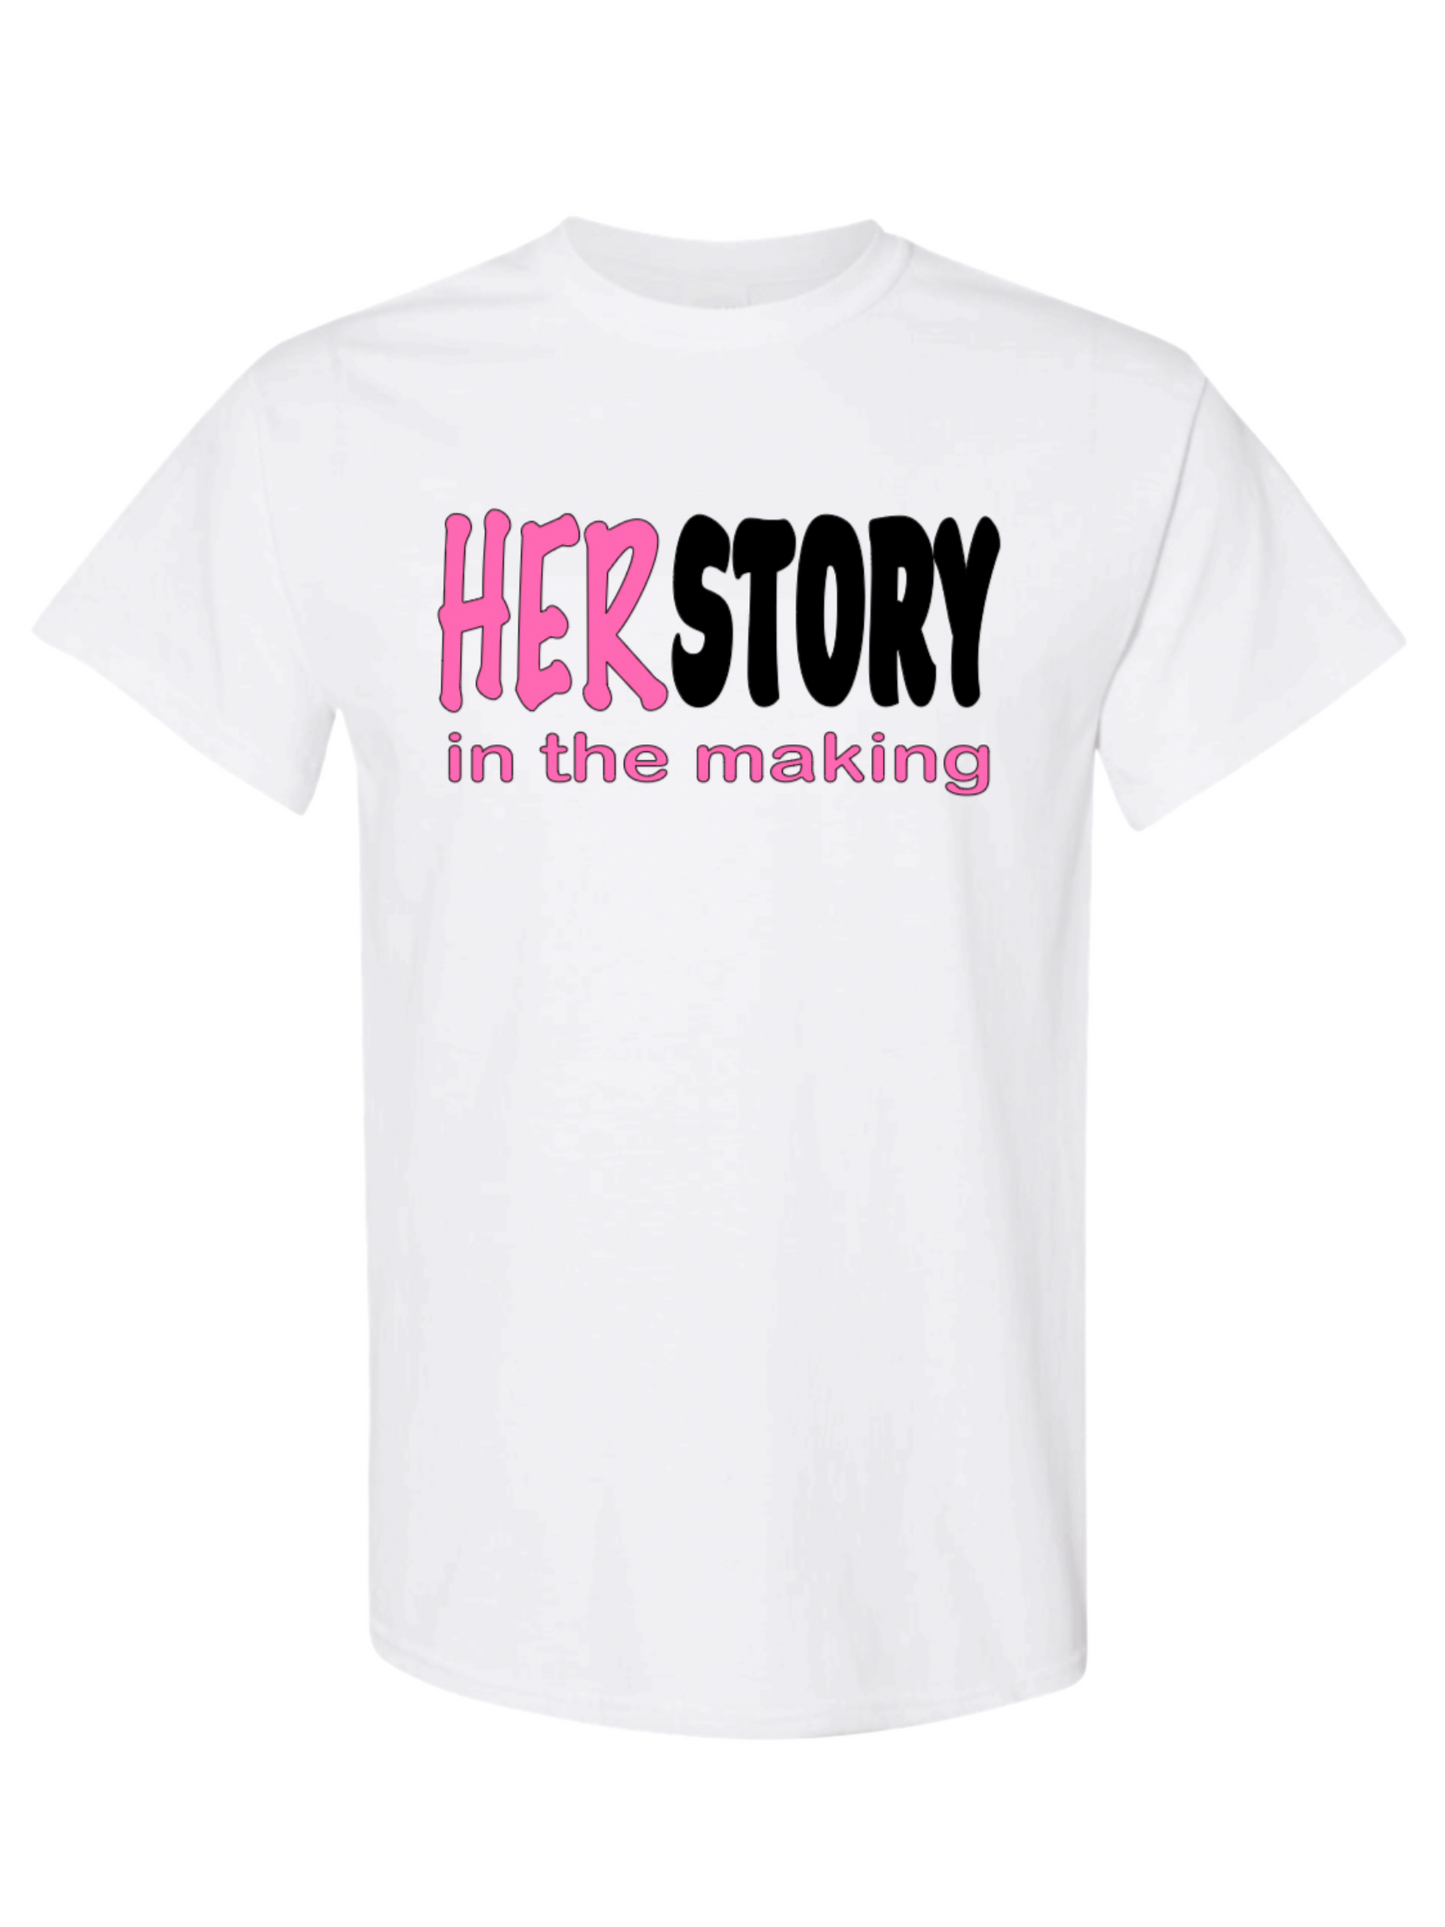 HERSTORY in the Making Tee and Hoodie